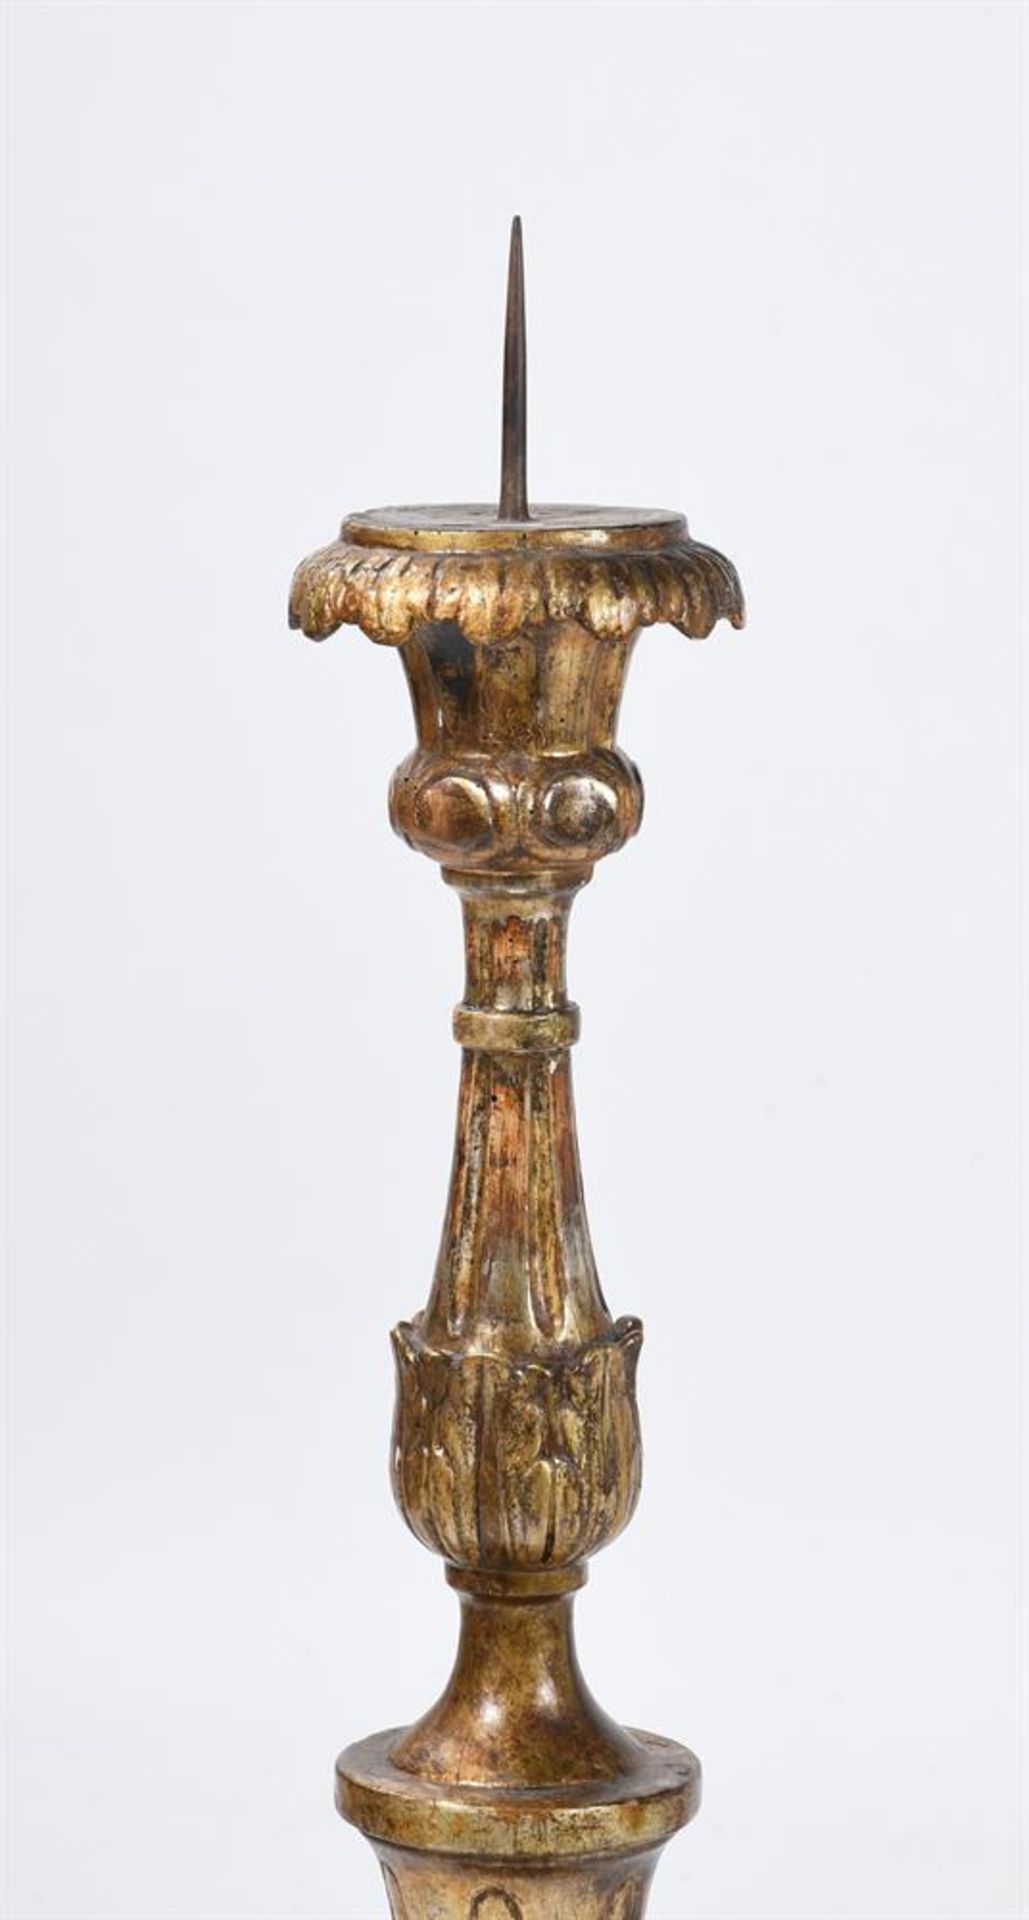 A PAIR OF ITALIAN GILTWOOD ALTAR CANDLESTICKS, 18TH CENTURY - Image 2 of 3